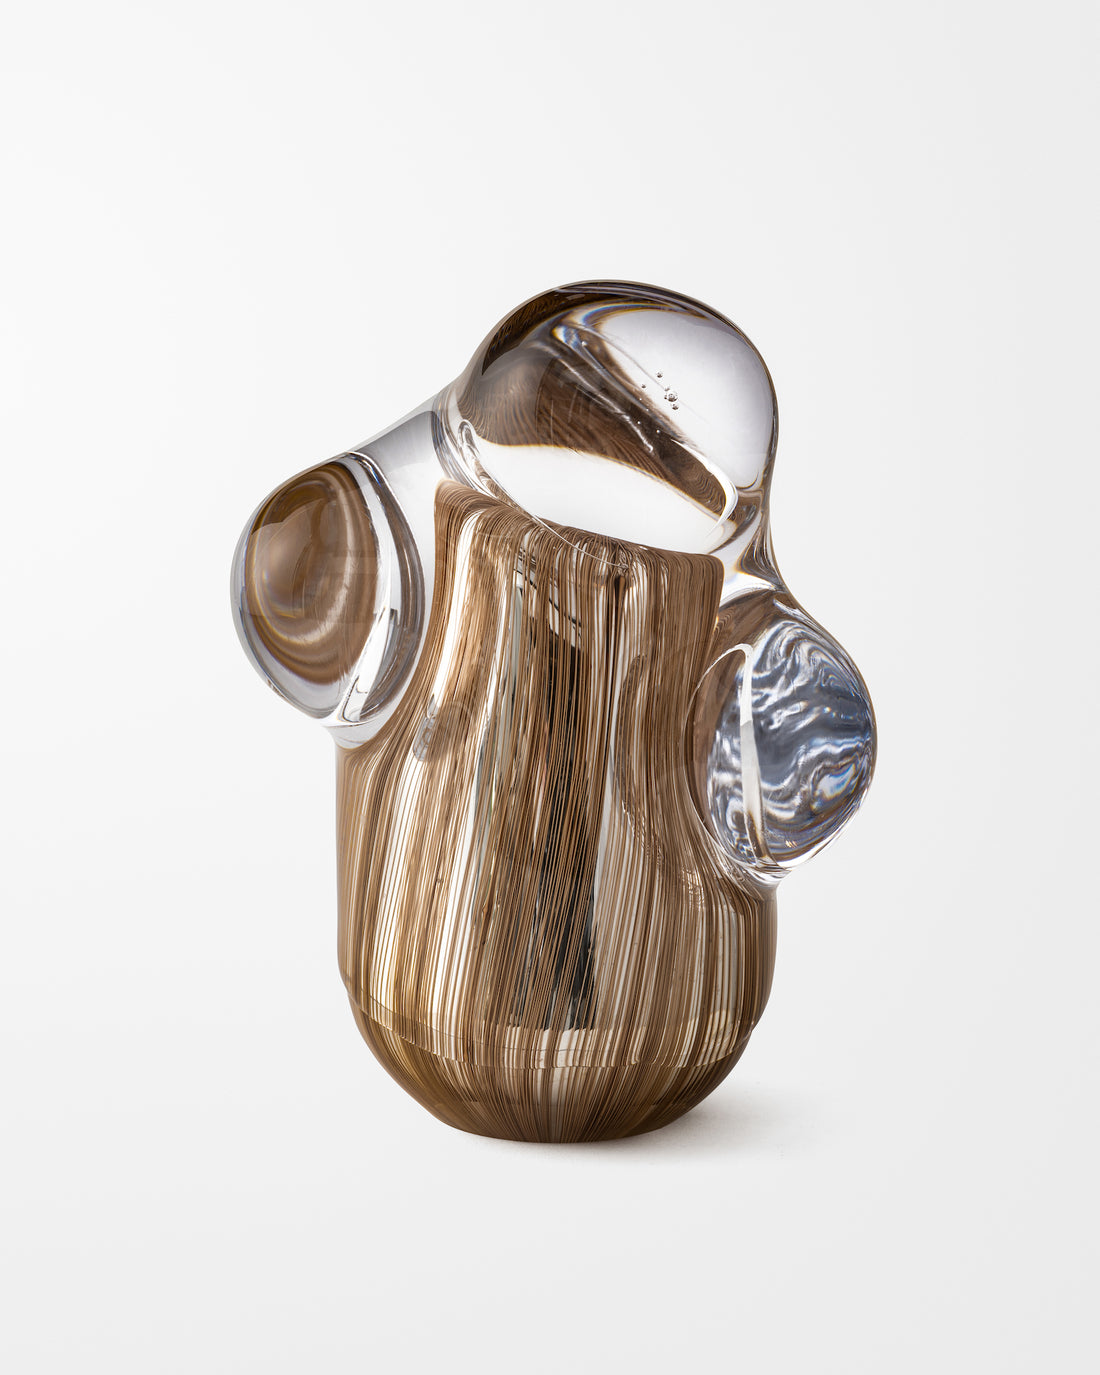 Self Generating Form in Silver and Chestnut I